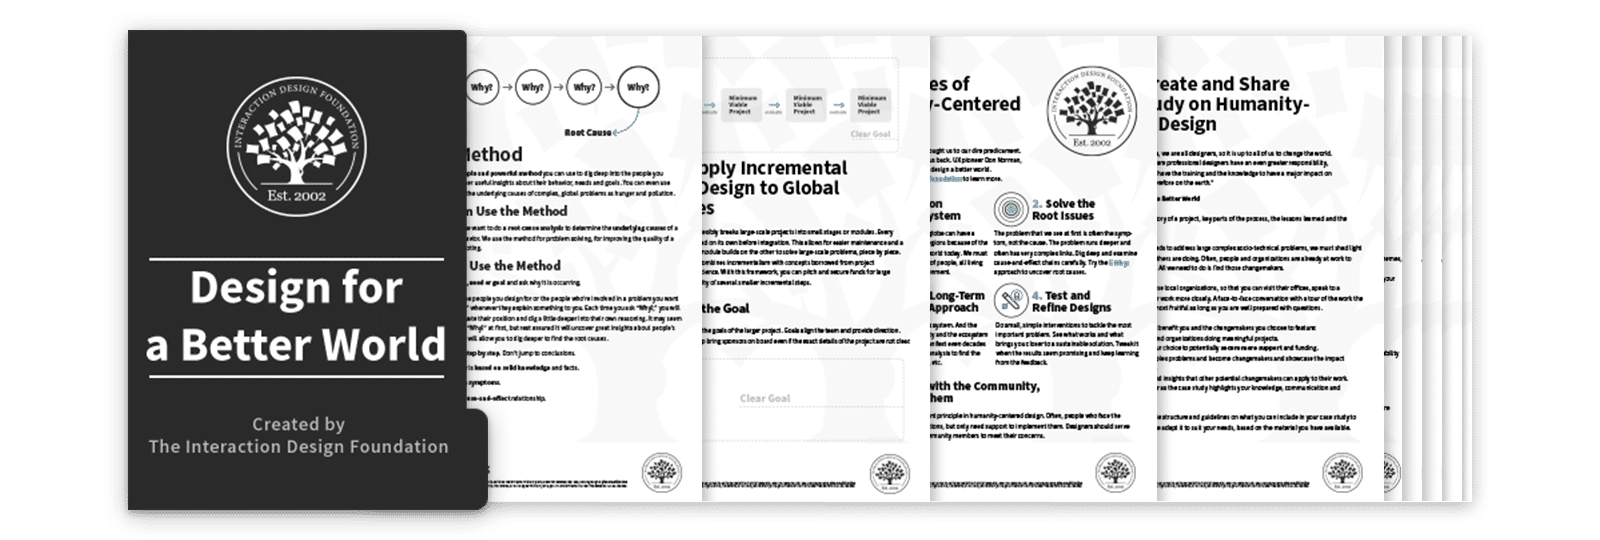 Bundle of 4 Design for a Better World with Don Norman templates